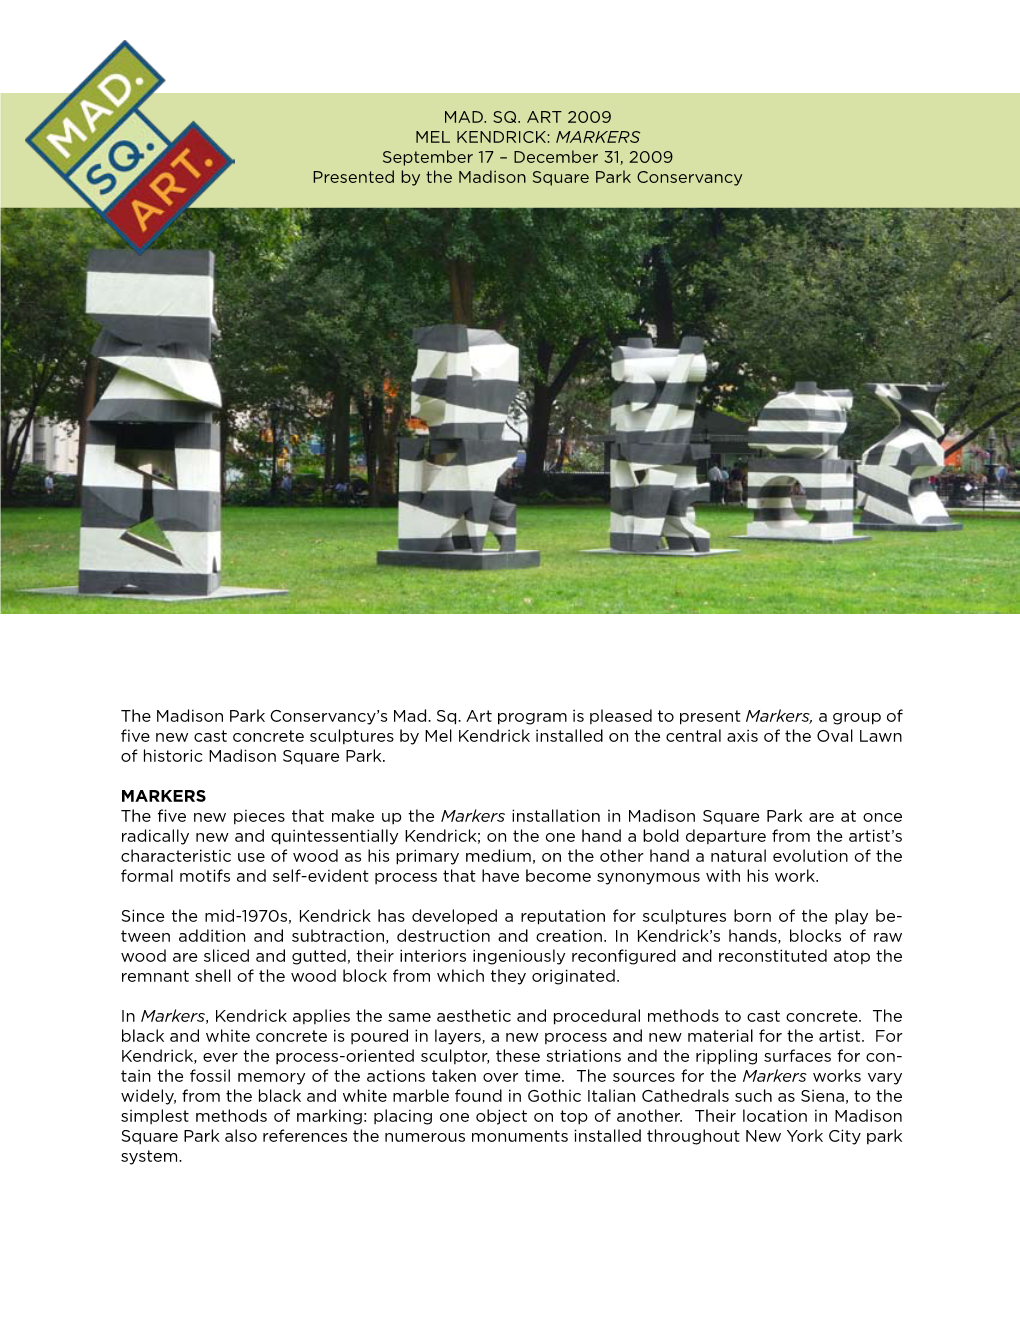 The Madison Park Conservancy's Mad. Sq. Art Program Is Pleased to Present Markers, a Group of Five New Cast Concrete Sculpture